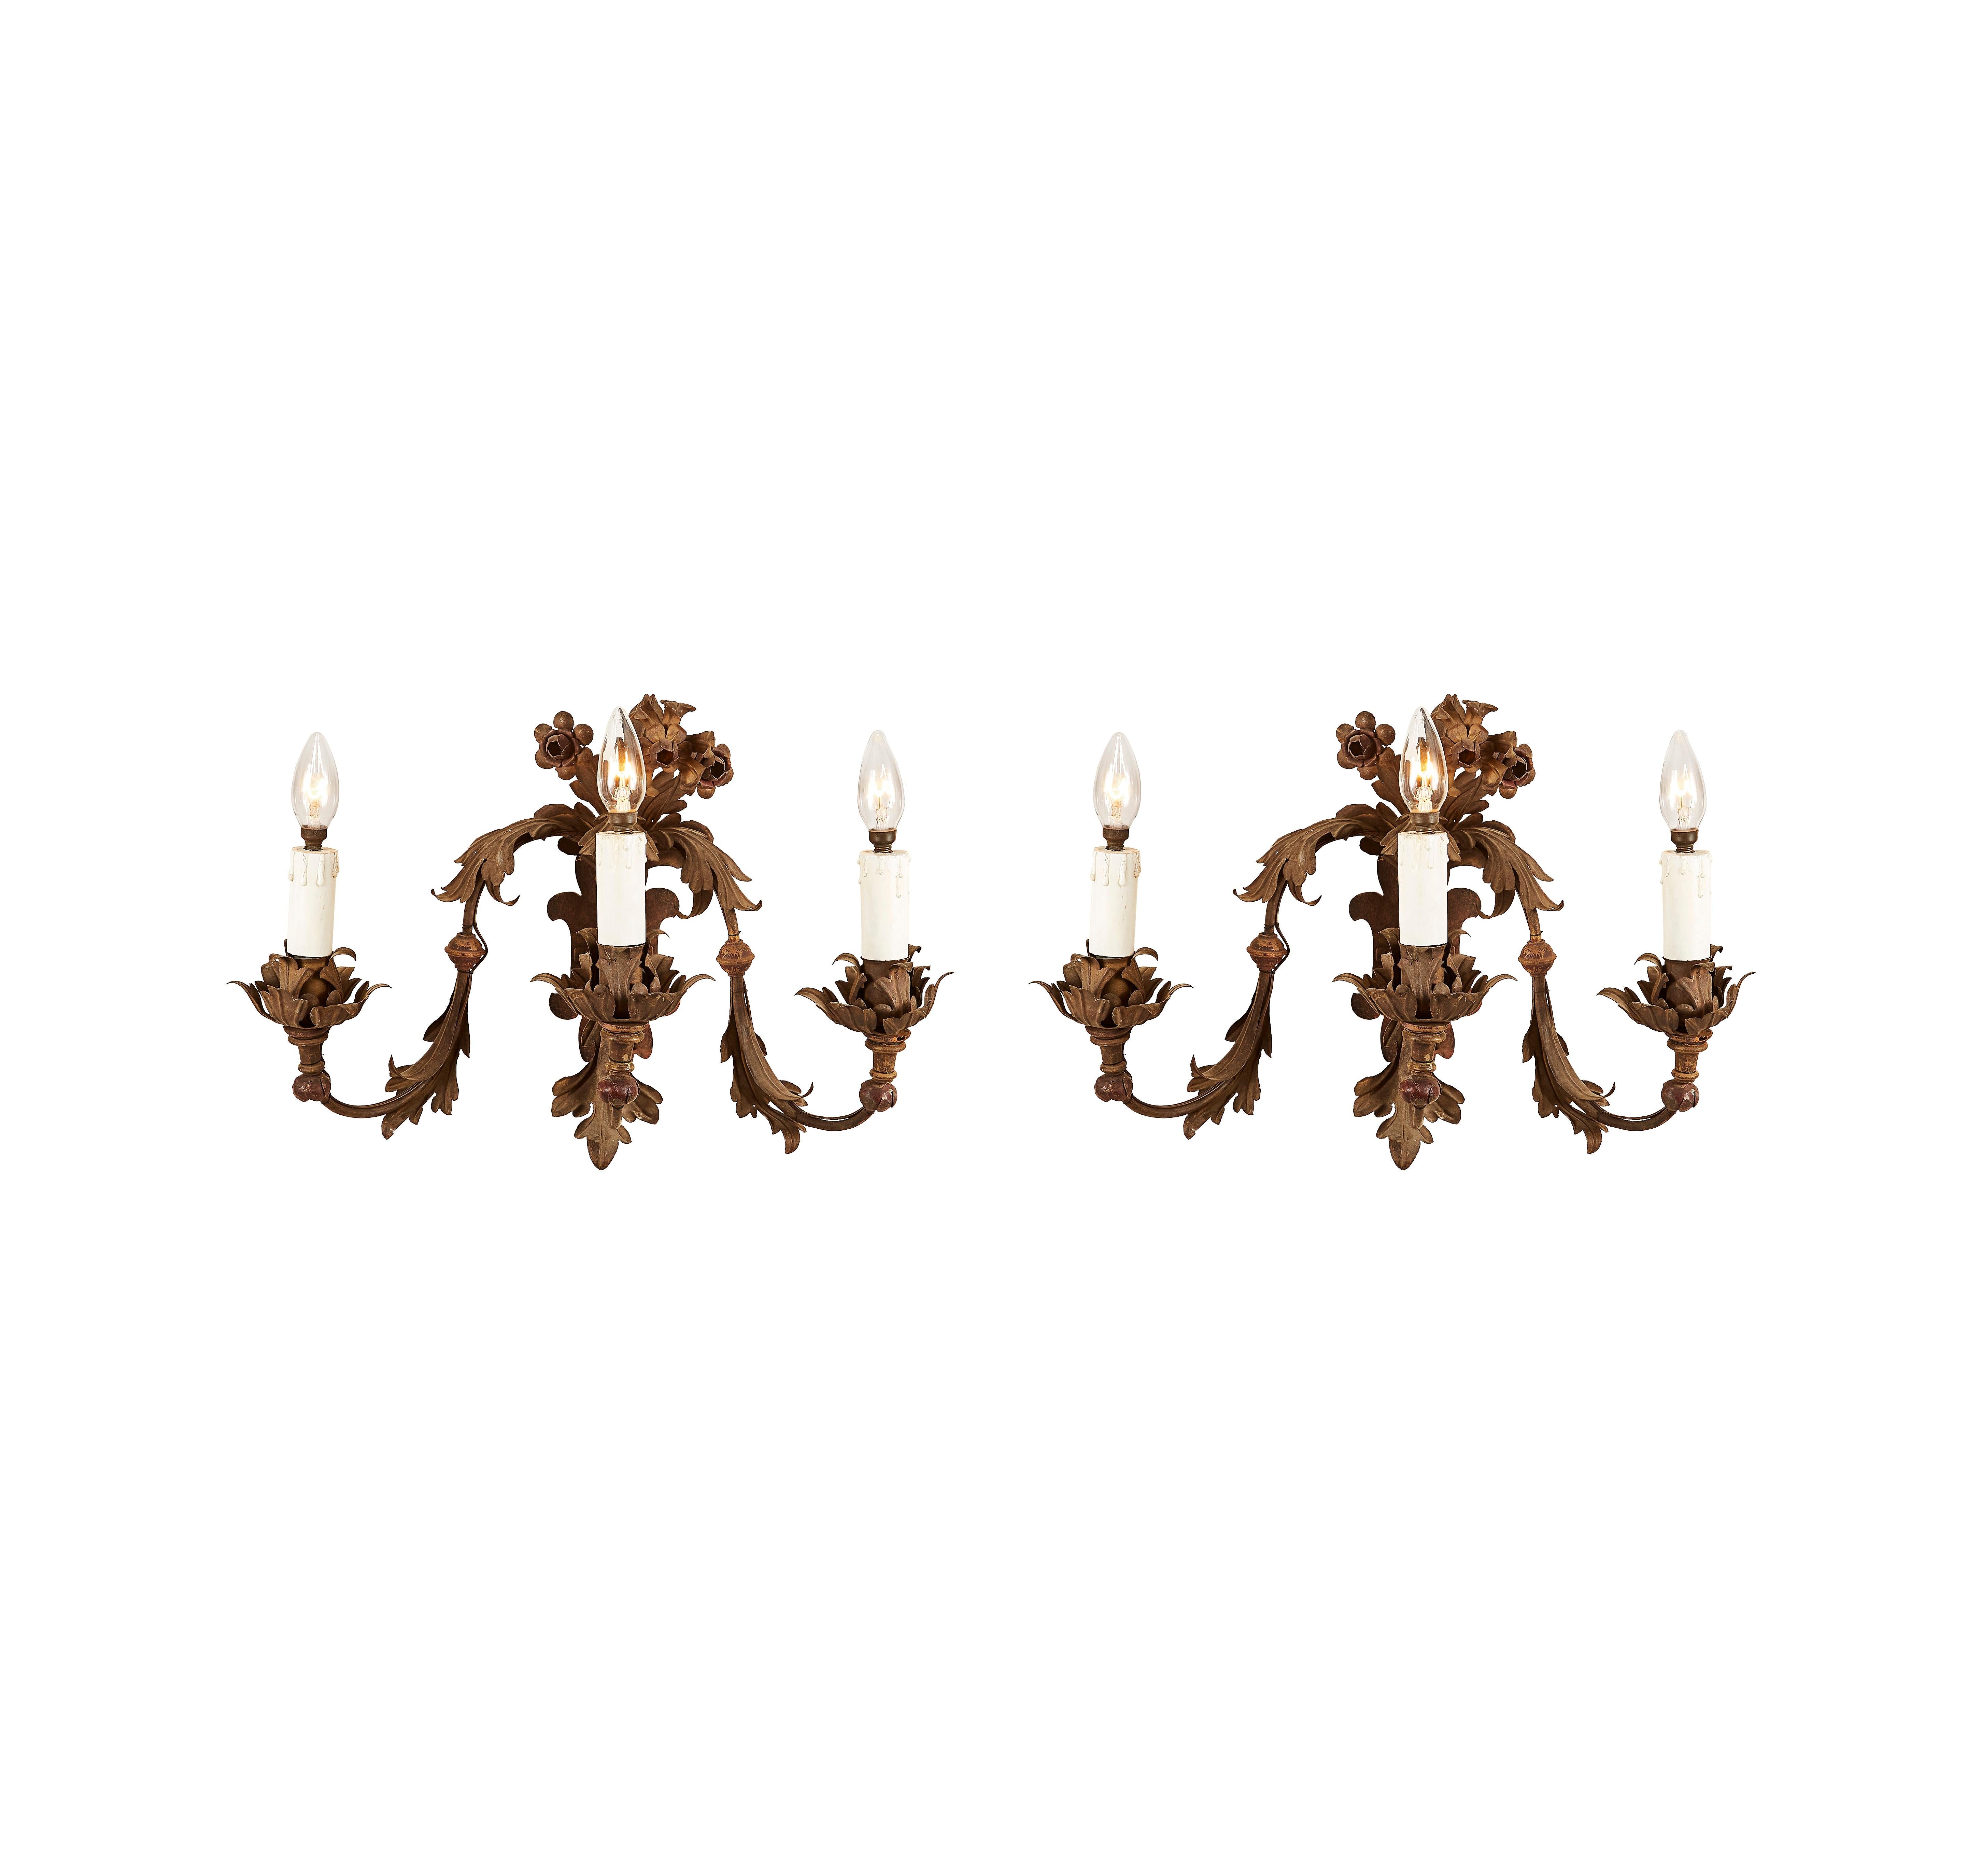 Pair of antique three-light wrought iron wall lights dating back to the late-19th century. This Italian artwork is fully handmade, featuring three wrought iron curved arms, decorated throughout with leaves and topped in the upper part by flowers.